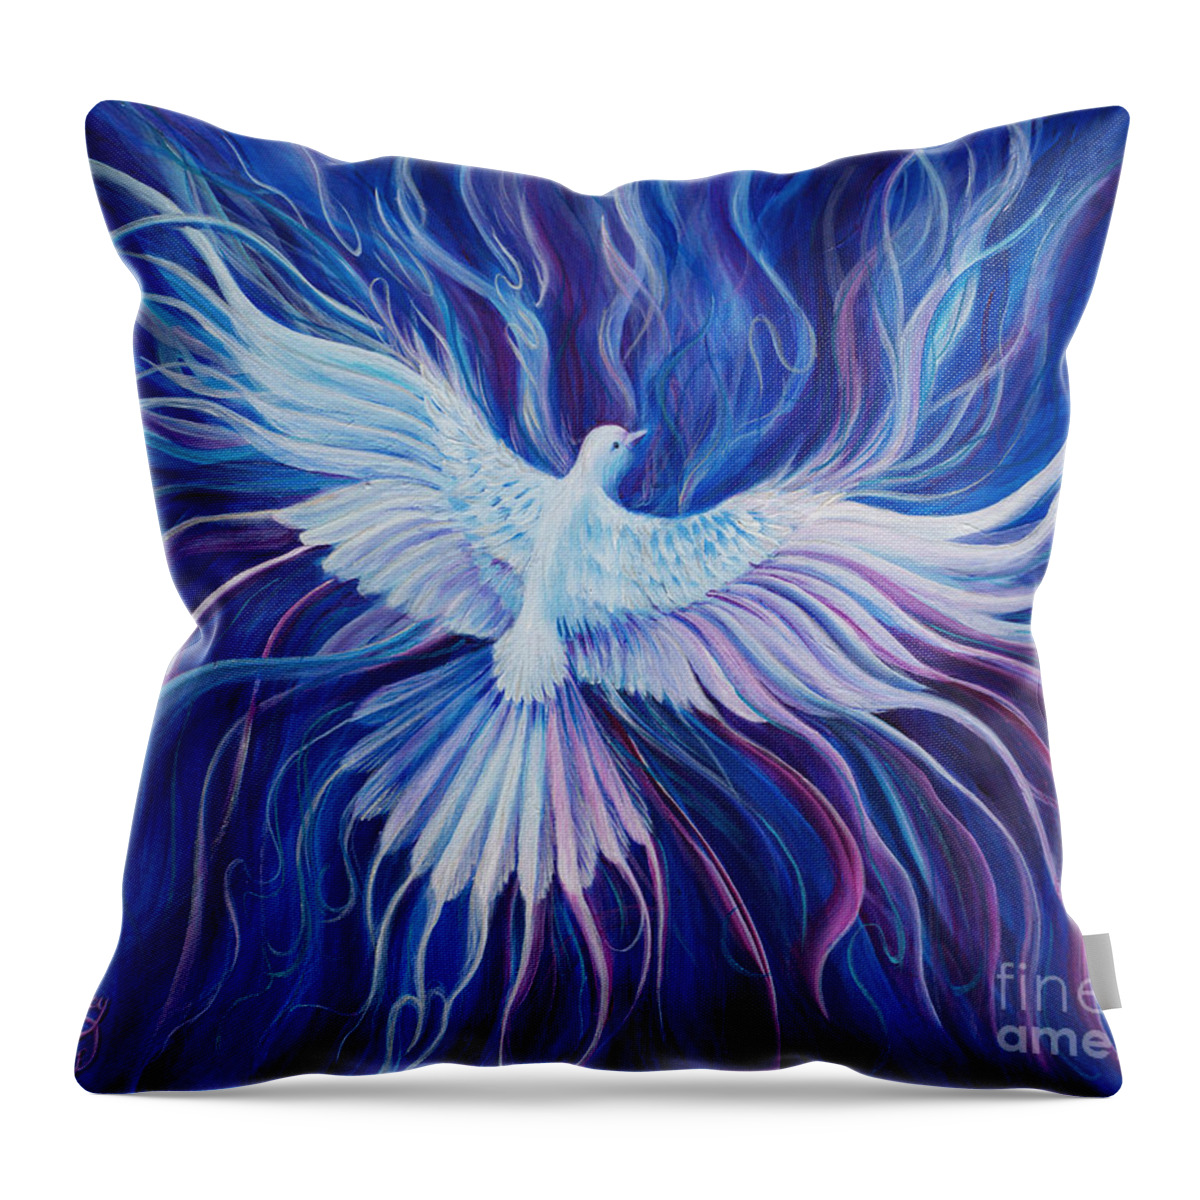 Holy Spirit Throw Pillow featuring the painting Eperchomai by Nancy Cupp